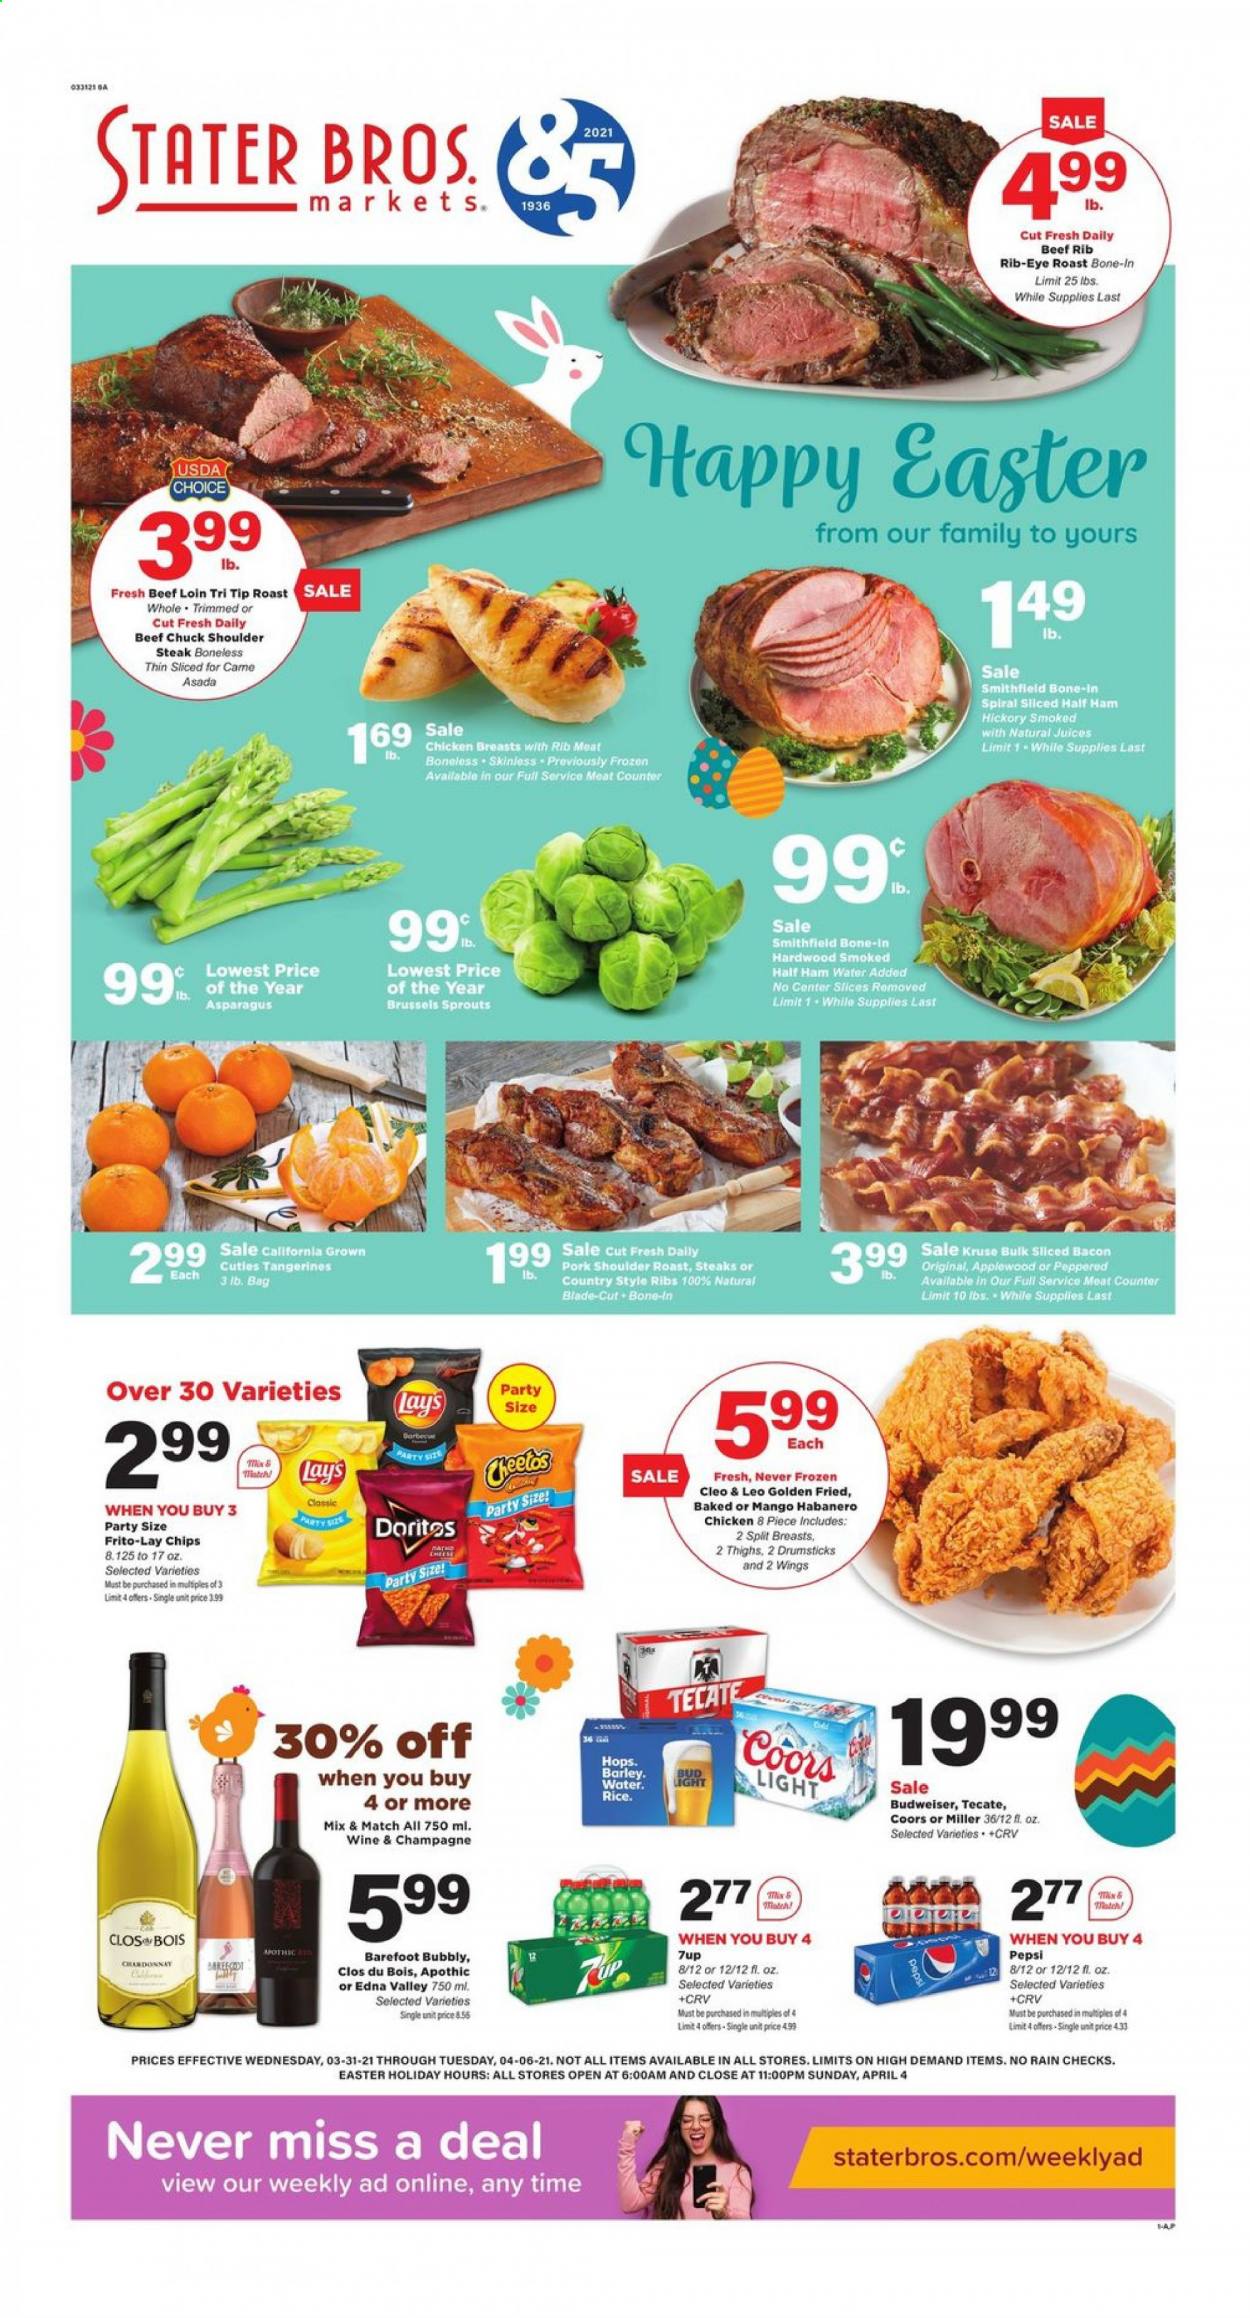 thumbnail - Stater Bros. Flyer - 03/31/2021 - 04/06/2021 - Sales products - Budweiser, Coors, habanero chicken, bacon, ham, brussel sprouts, Doritos, Lay’s, Frito-Lay, Pepsi, juice, 7UP, champagne, wine, beer, Bud Light, Miller, chicken breasts, steak, pork meat, pork roast, pork shoulder, country style ribs, half ham, asparagus, tangerines. Page 1.